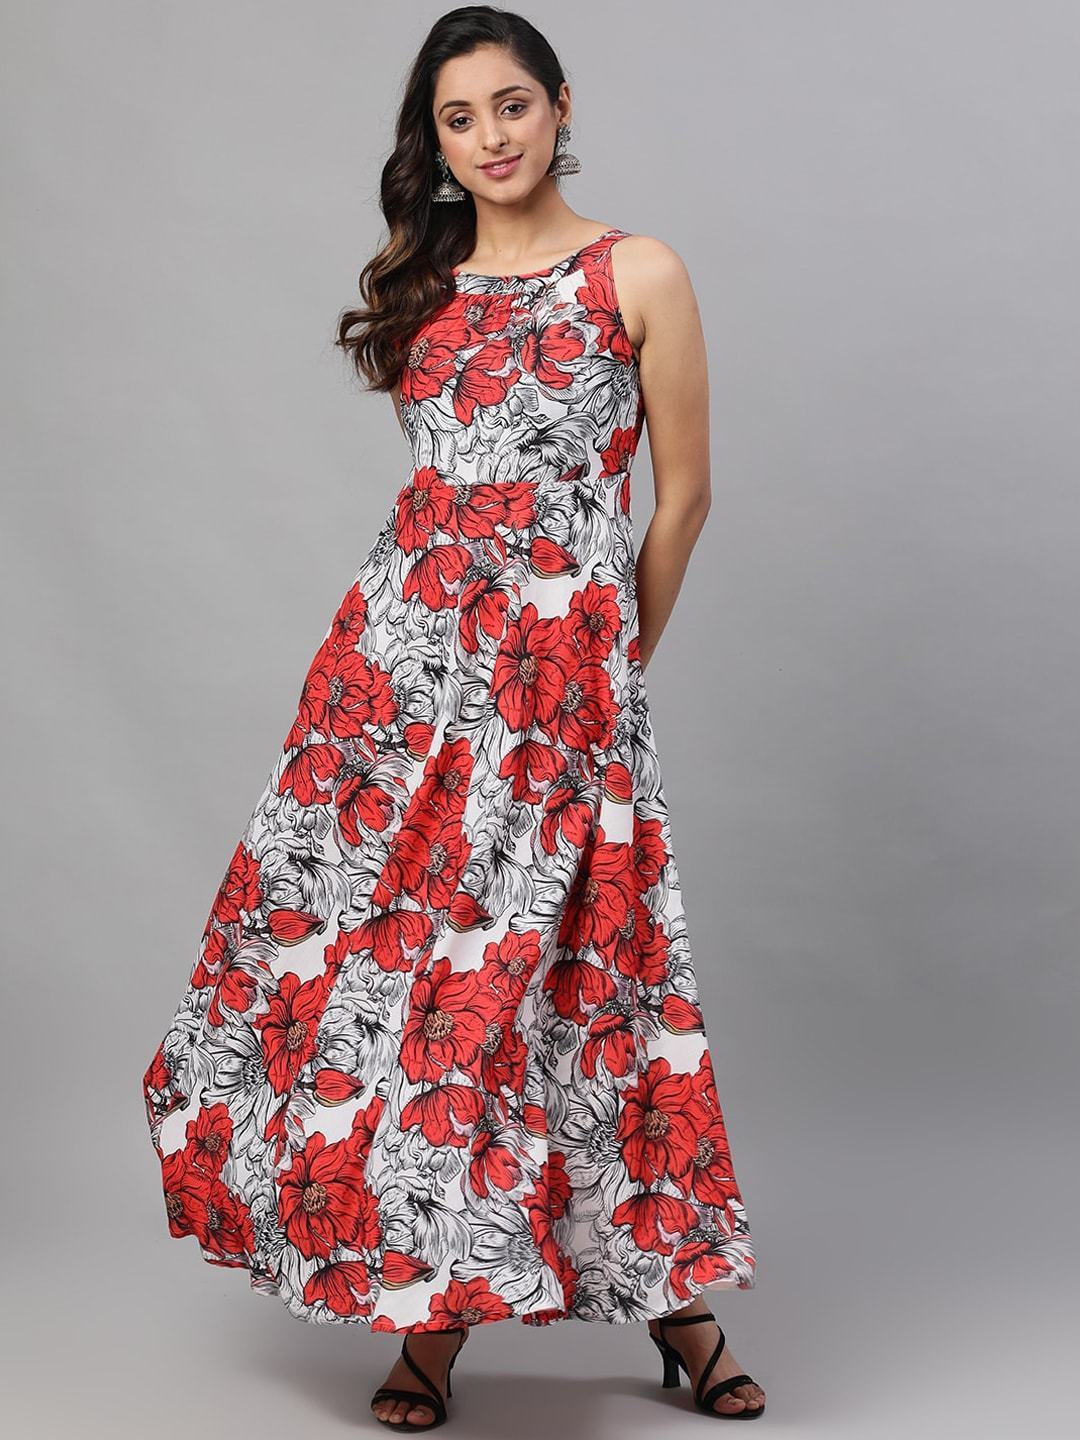 Women's  White& Red Floral Printed Maxi Dress - AKS